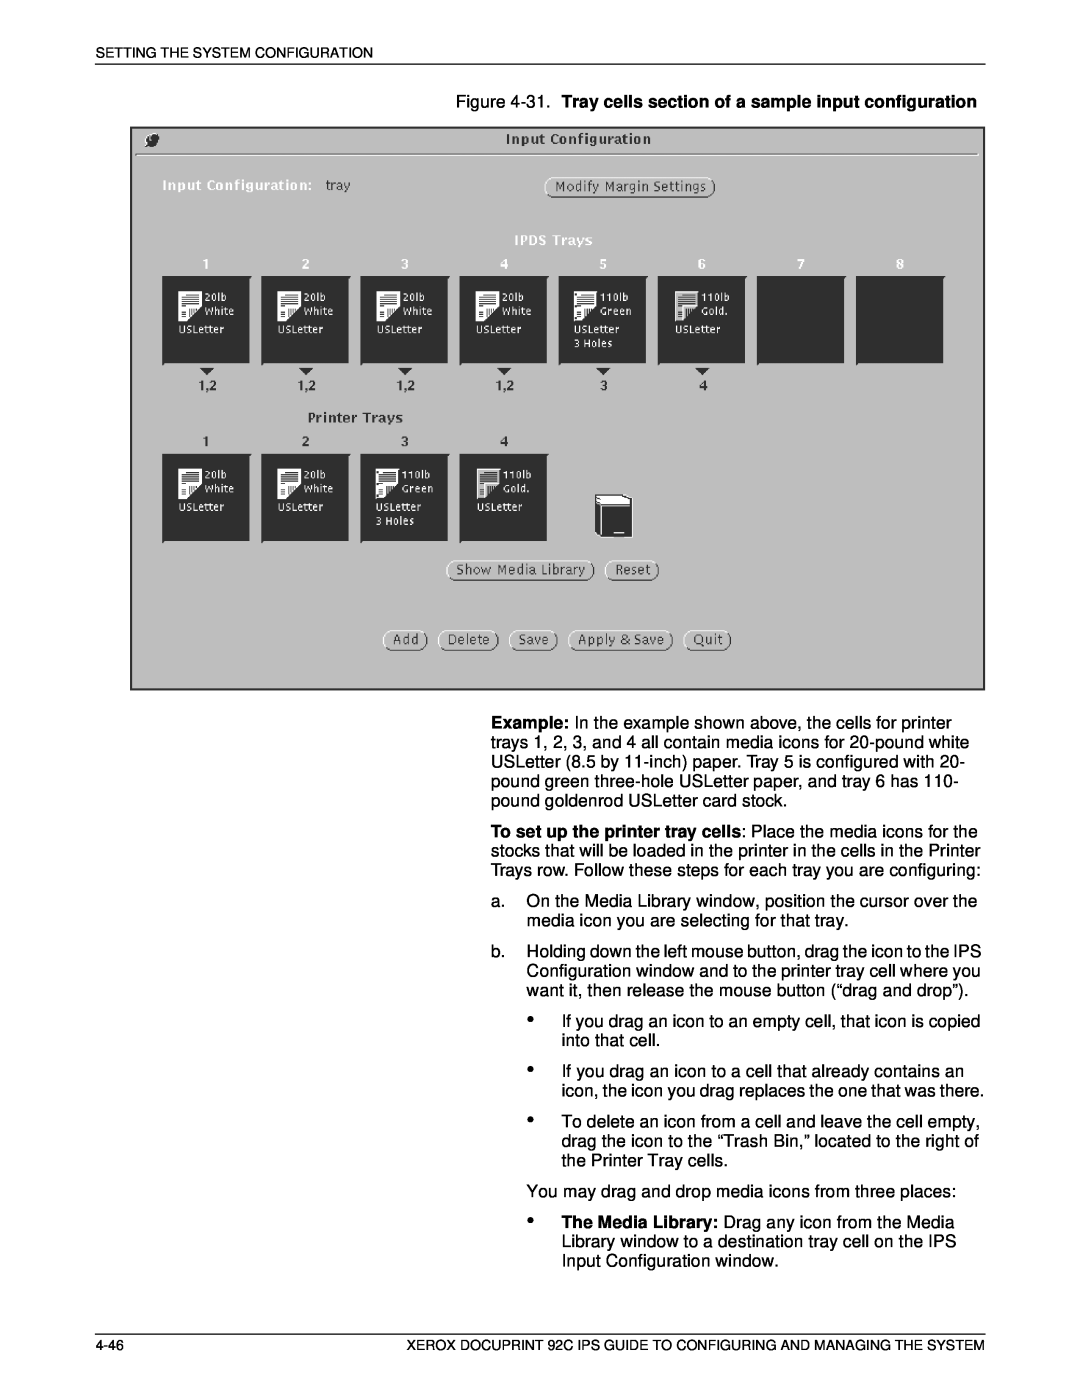 Xerox 92C IPS manual 31. Tray cells section of a sample input configuration 